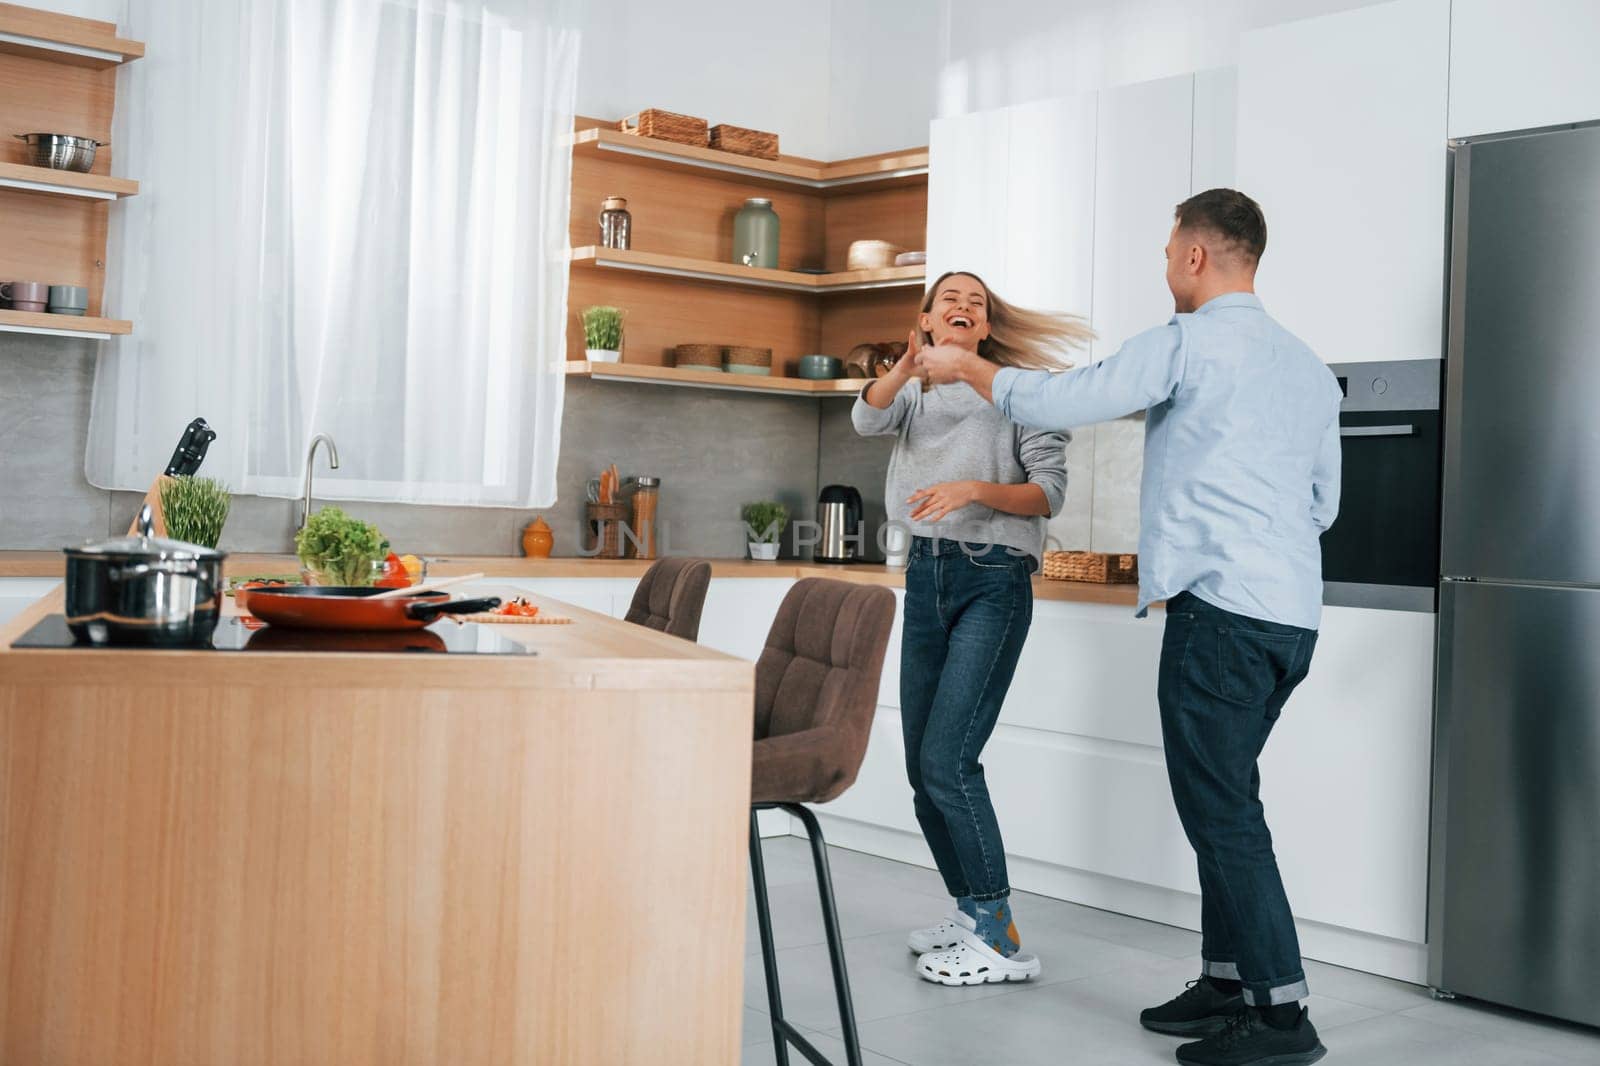 Dancing together. Couple preparing food at home on the modern kitchen by Standret